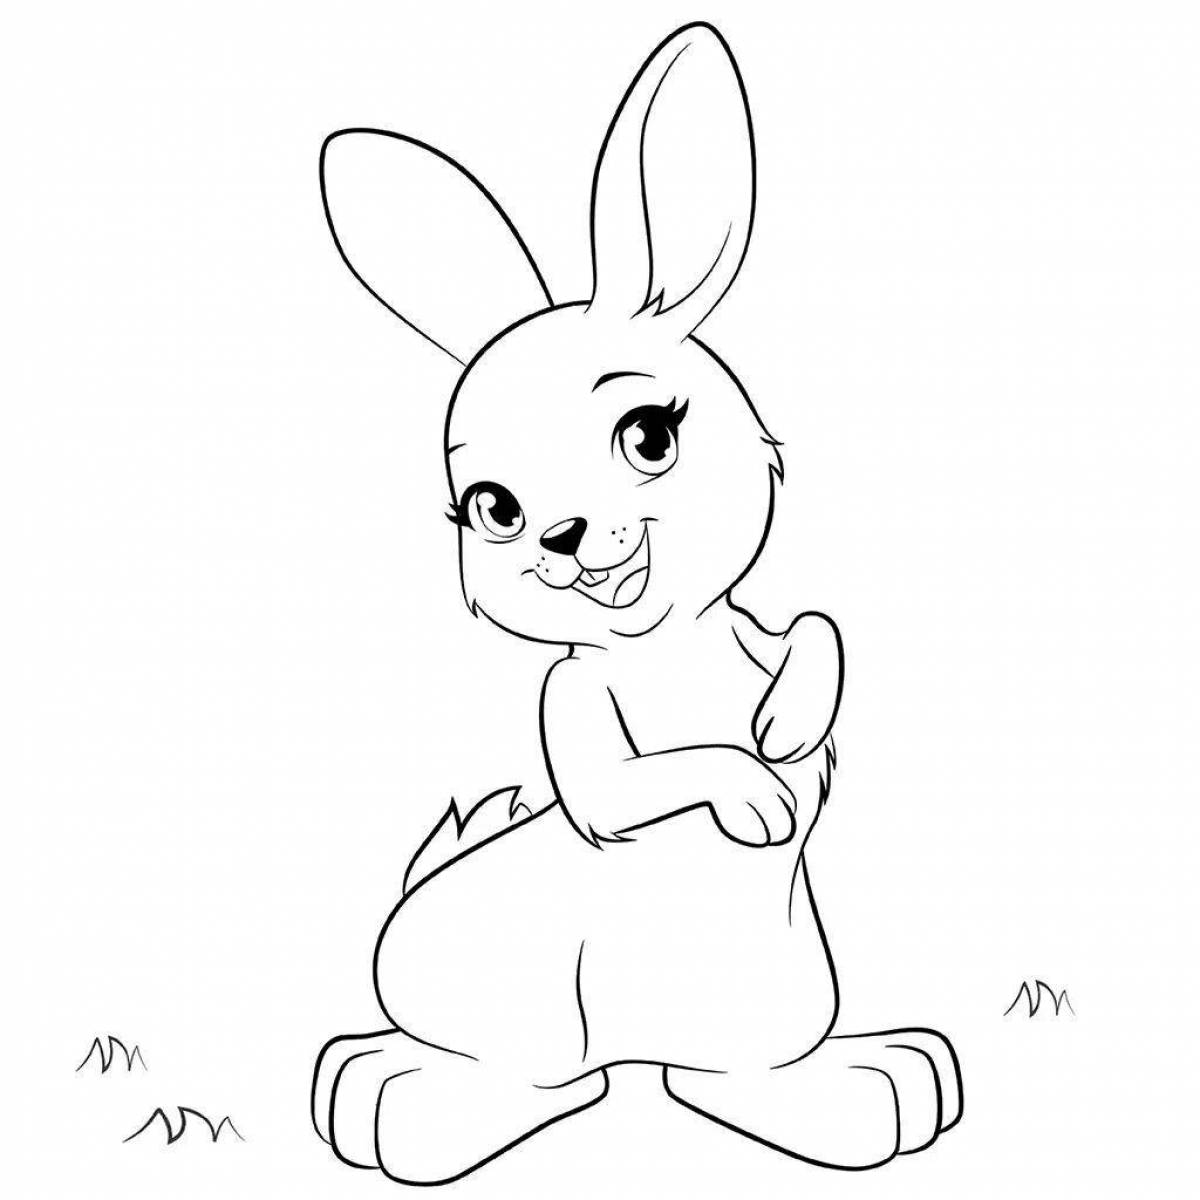 Adorable hare coloring book